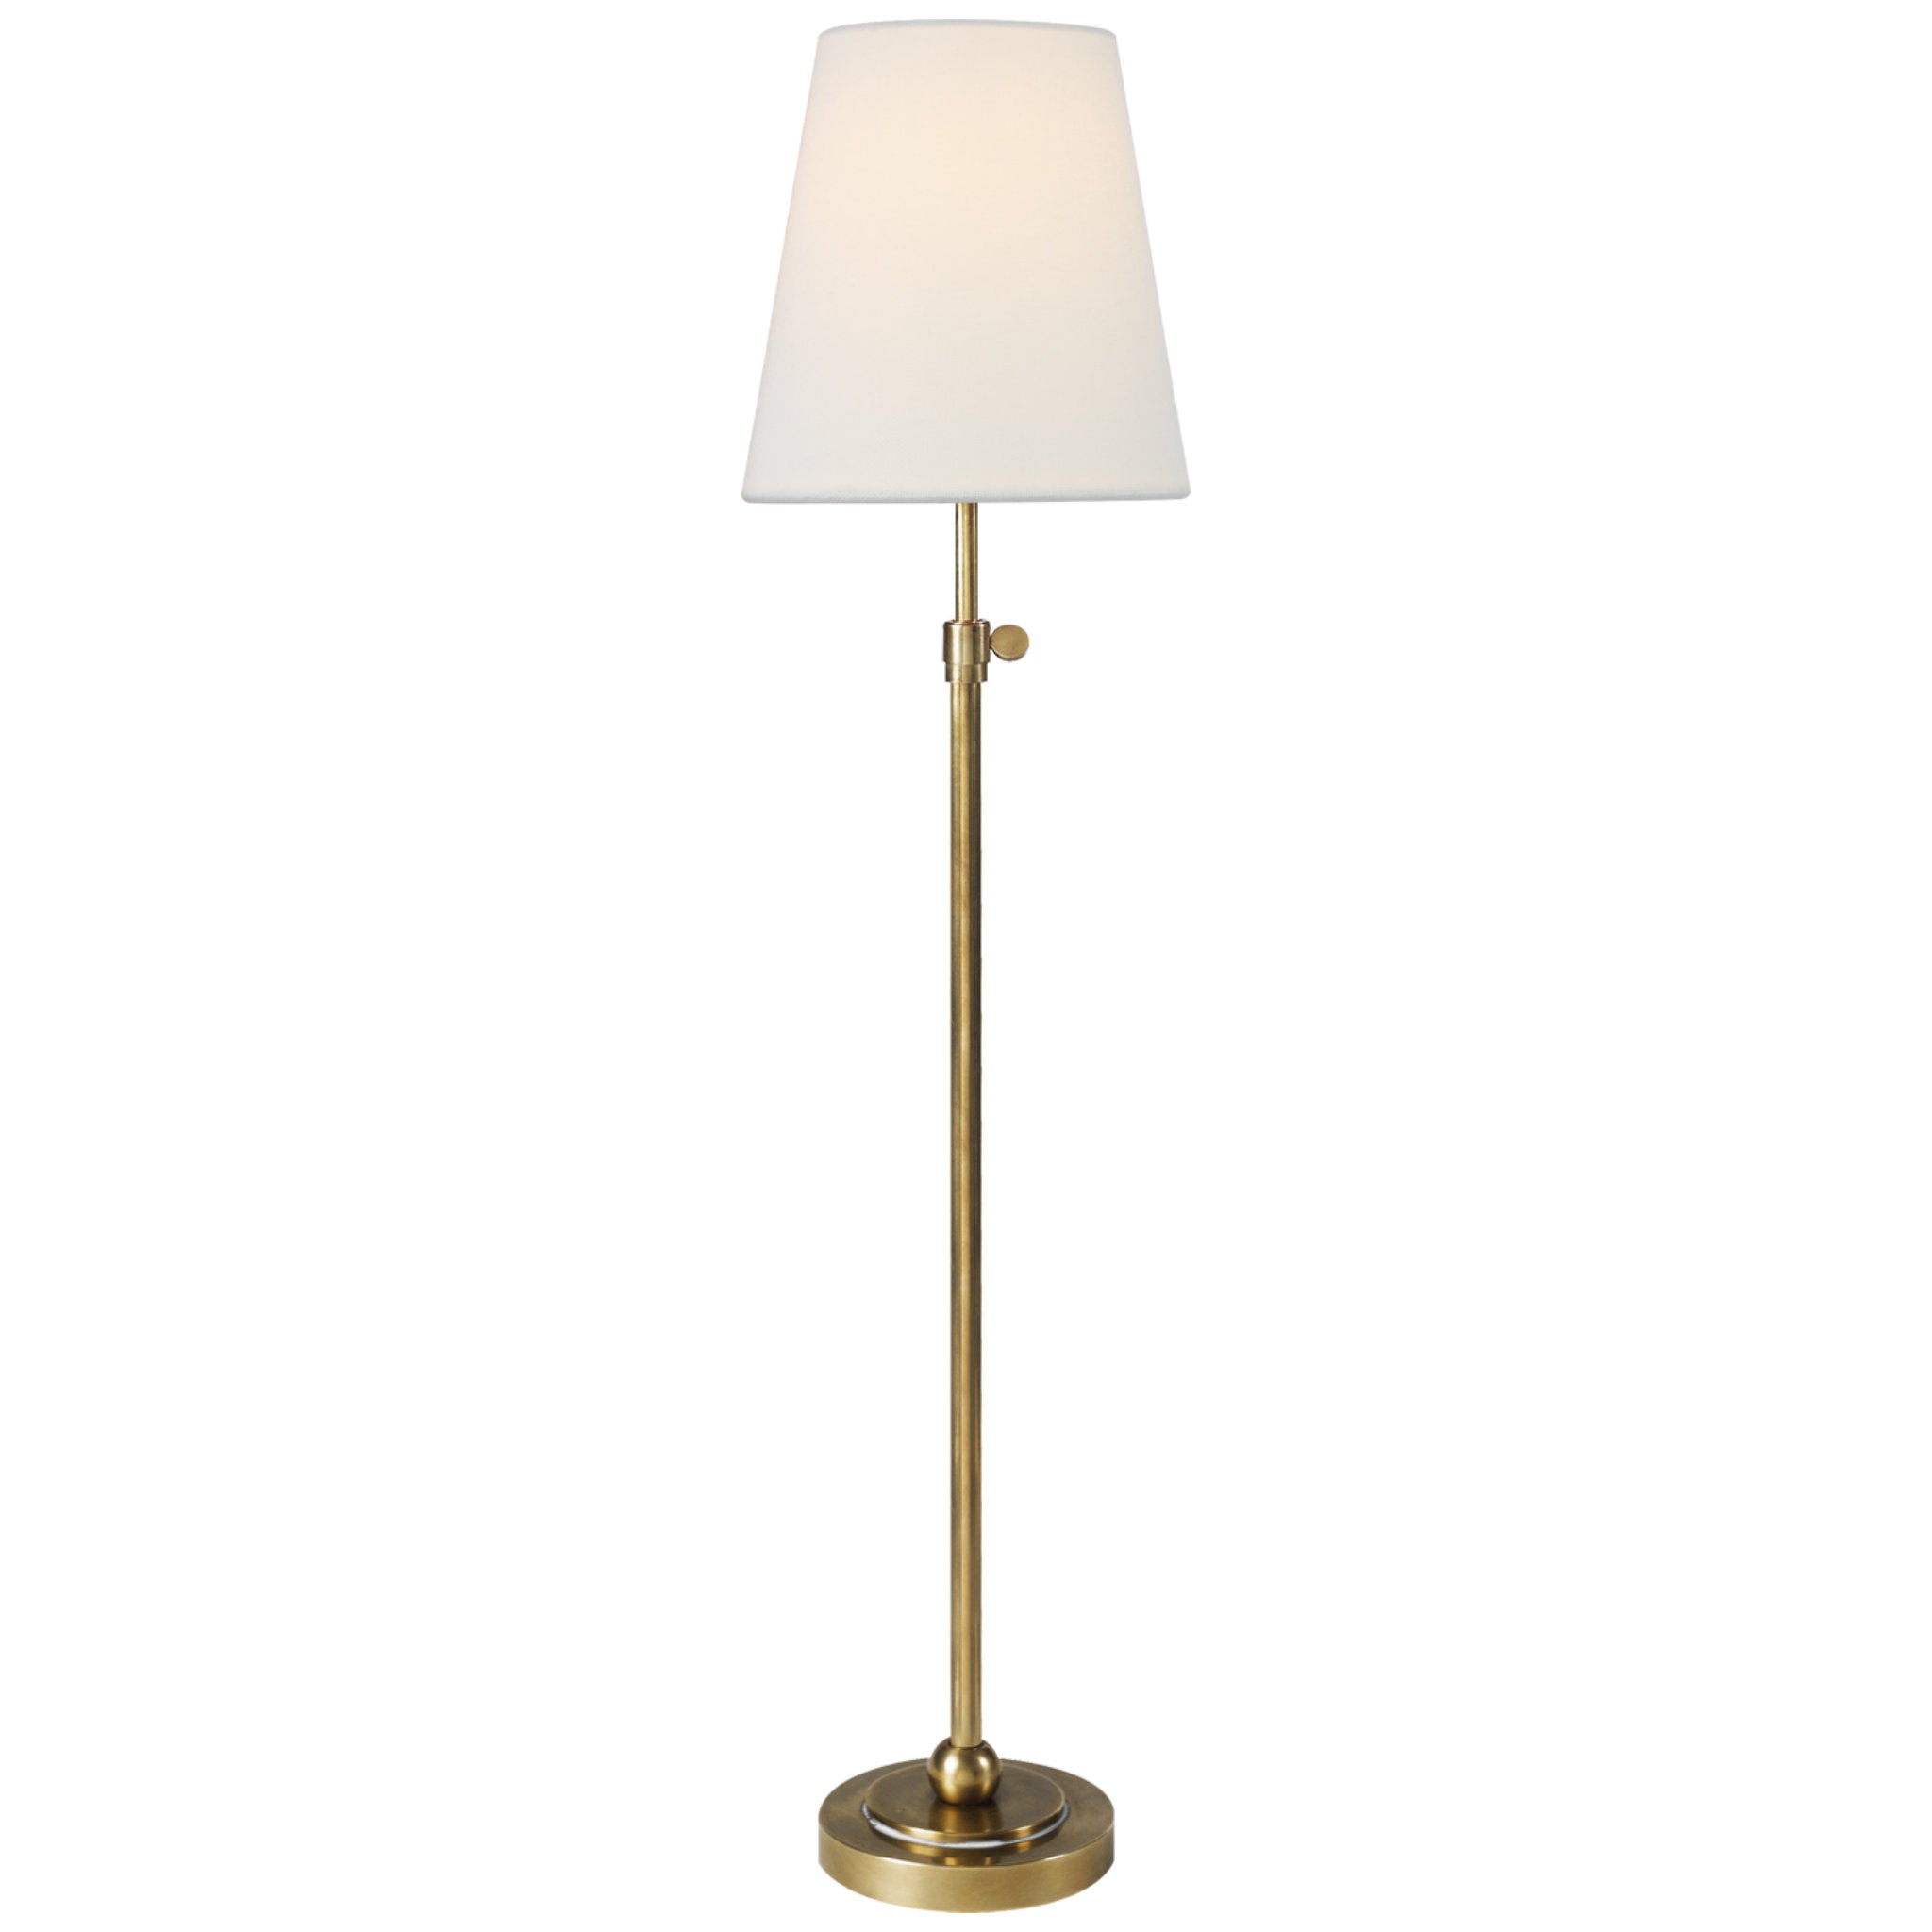 Thomas O'Brien Bryant Table Lamp in Hand-Rubbed Antique Brass with Linen Shade